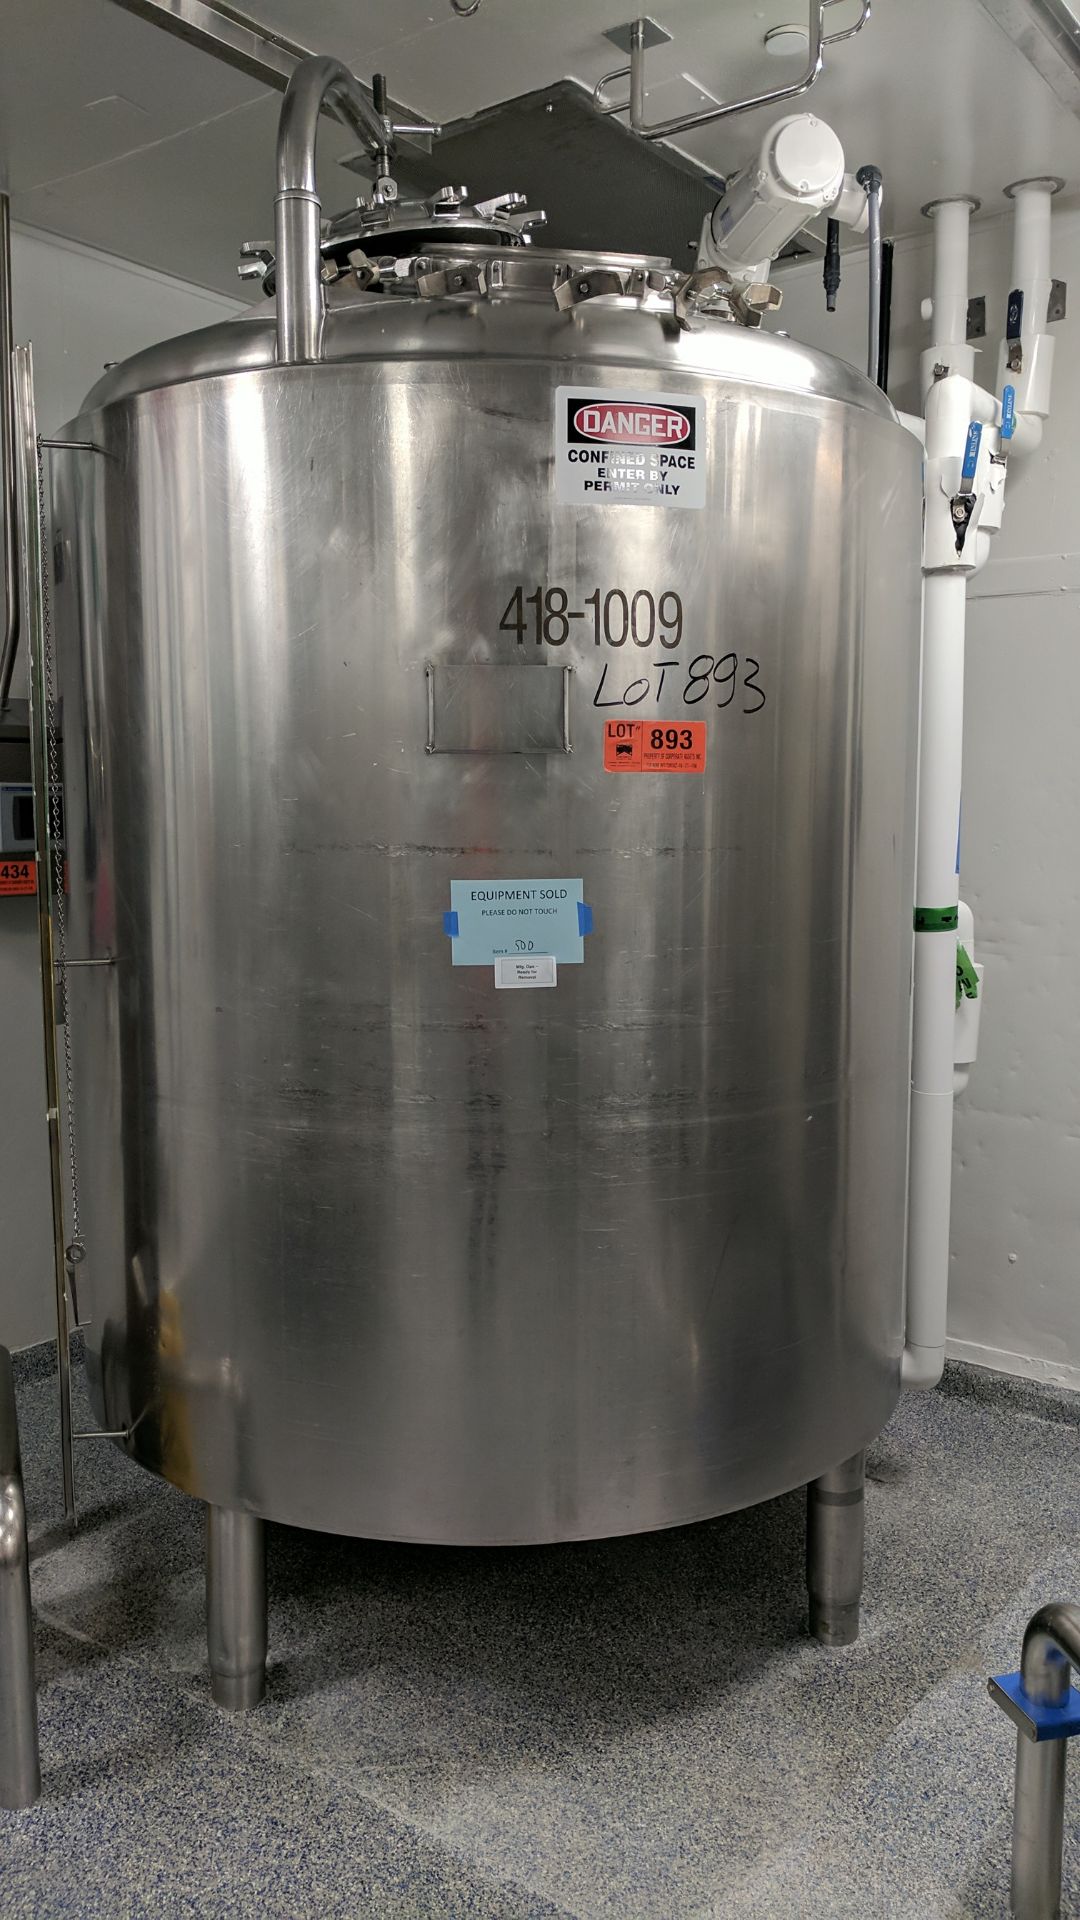 DCI (R&R 2001) TANK# P-9 STAINLESS STEEL JACKETED MIXING TANK WITH 4000 LITER CAPACITY, 50 PSIG @